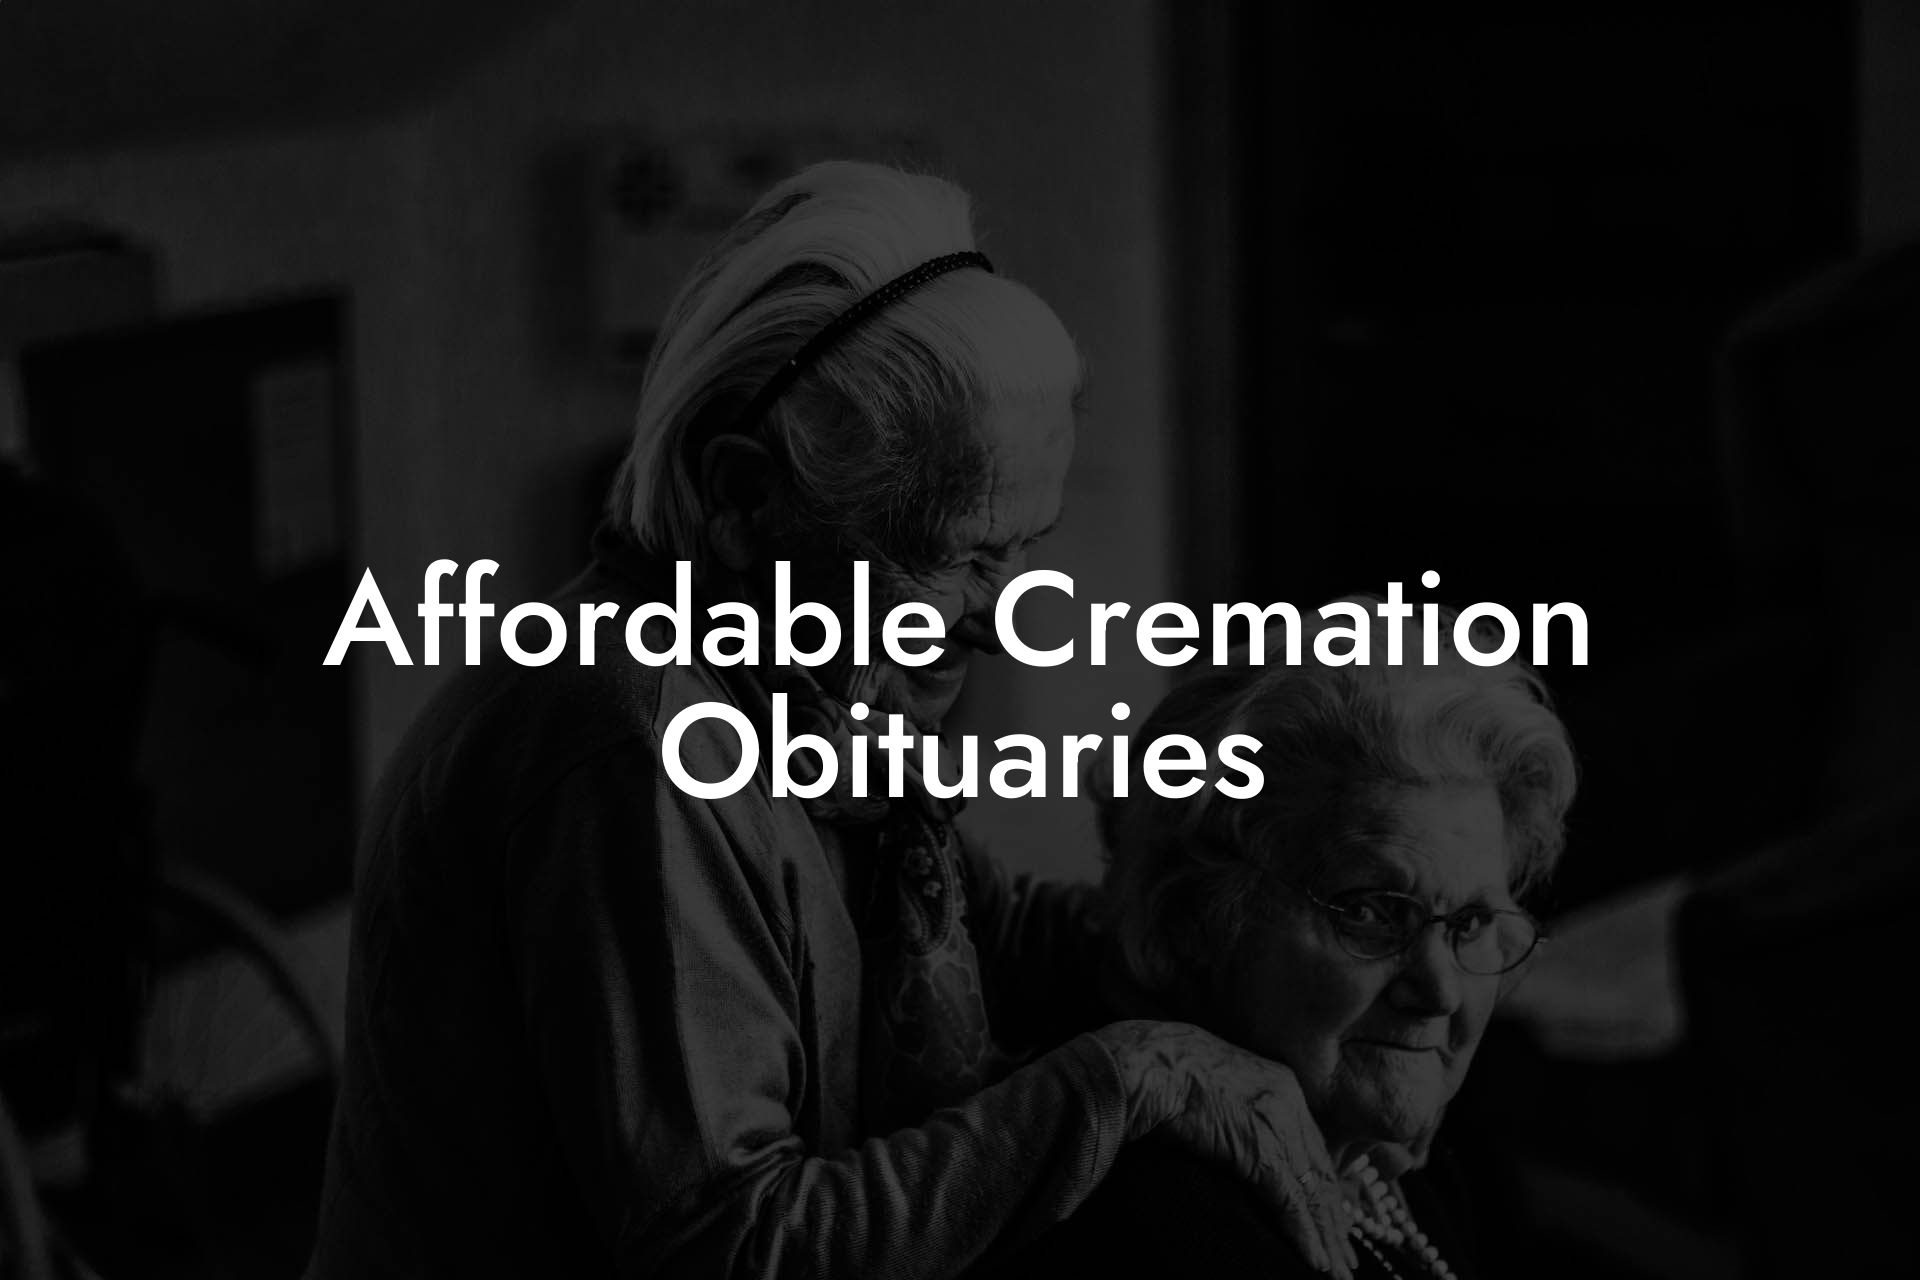 Affordable Cremation Obituaries